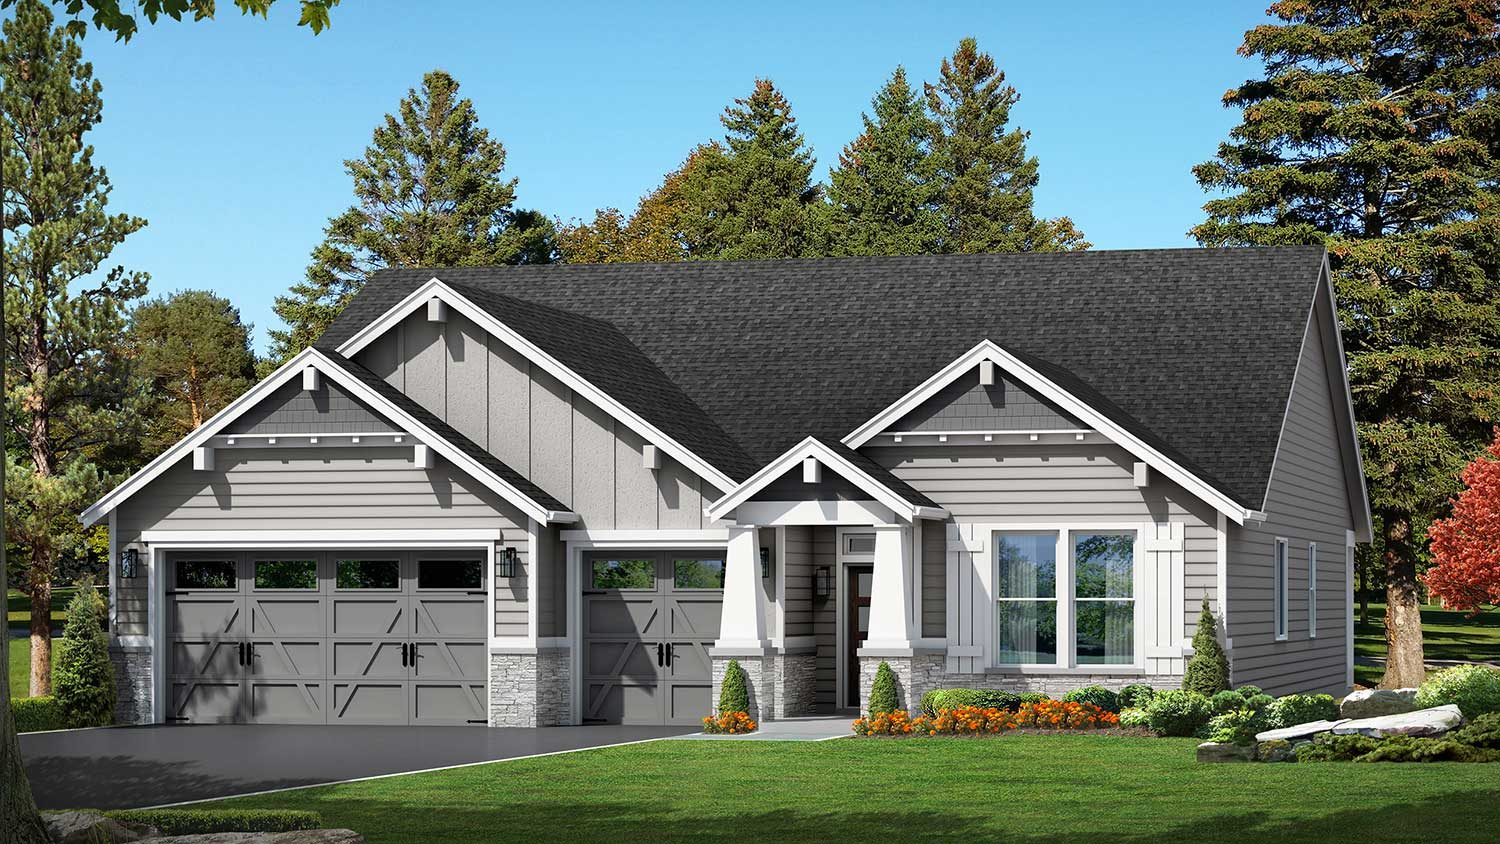 Rendering of the Cottonwood by Kingston Homes